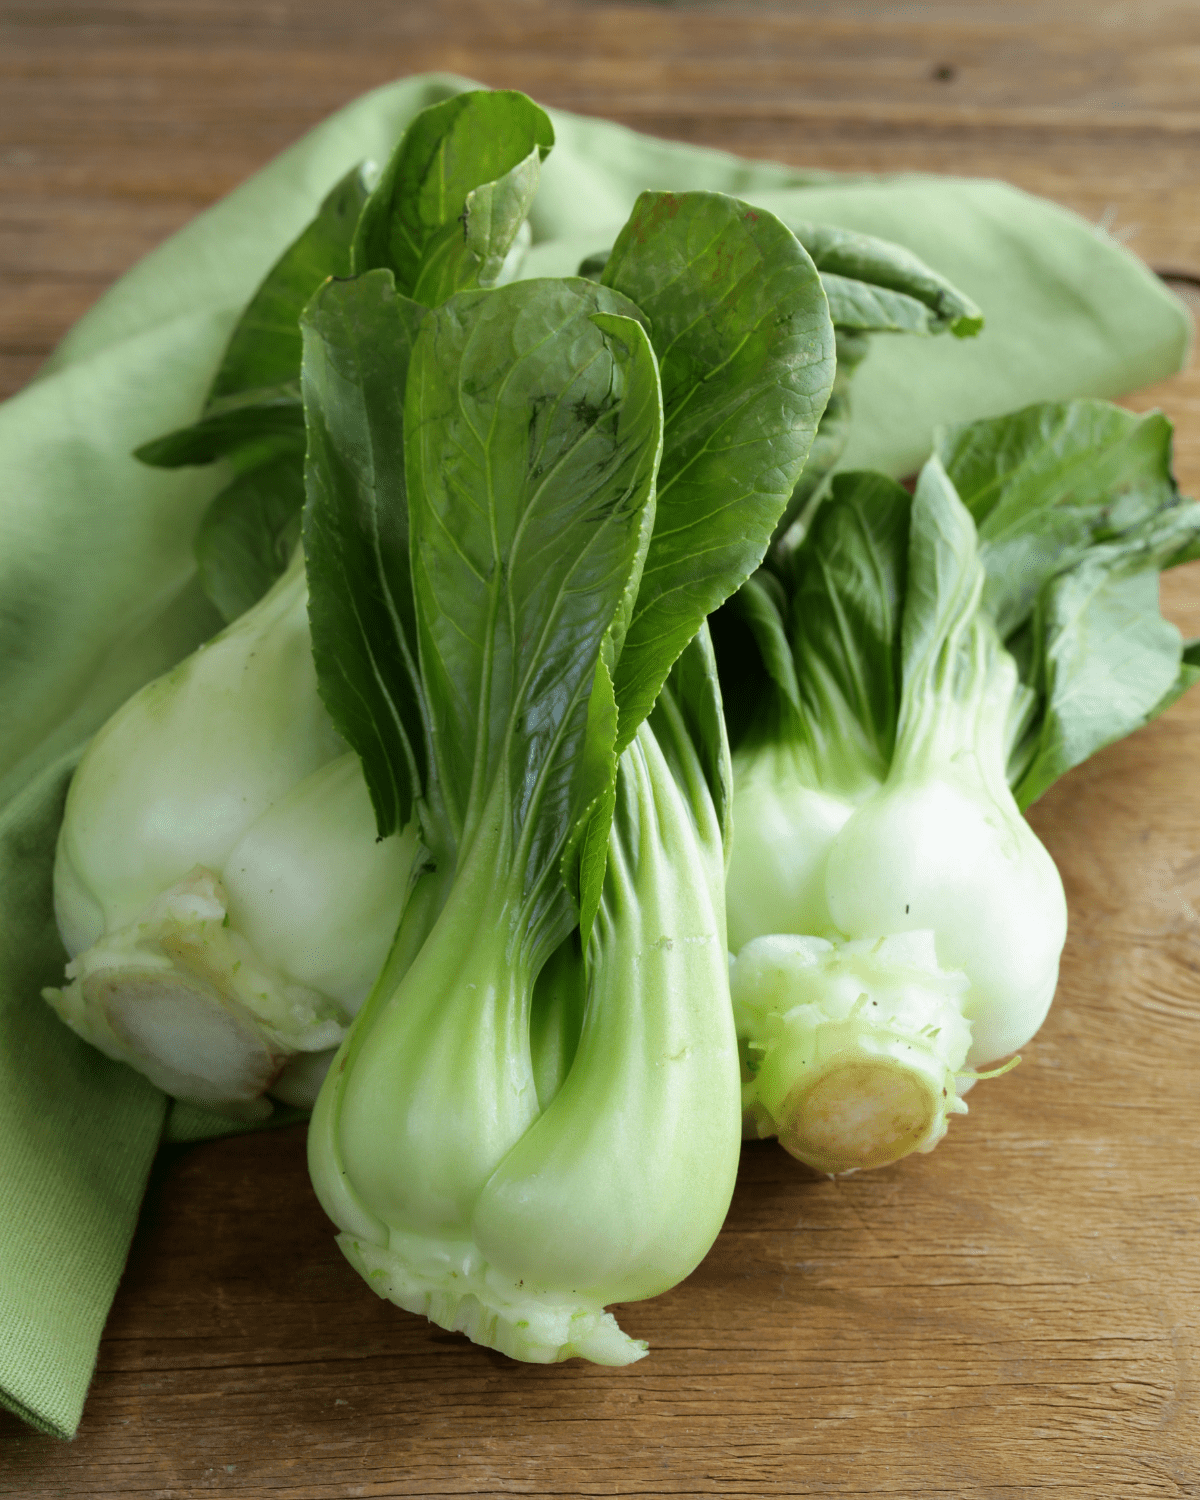 Three heads of bok choy pictured with a green napkin.